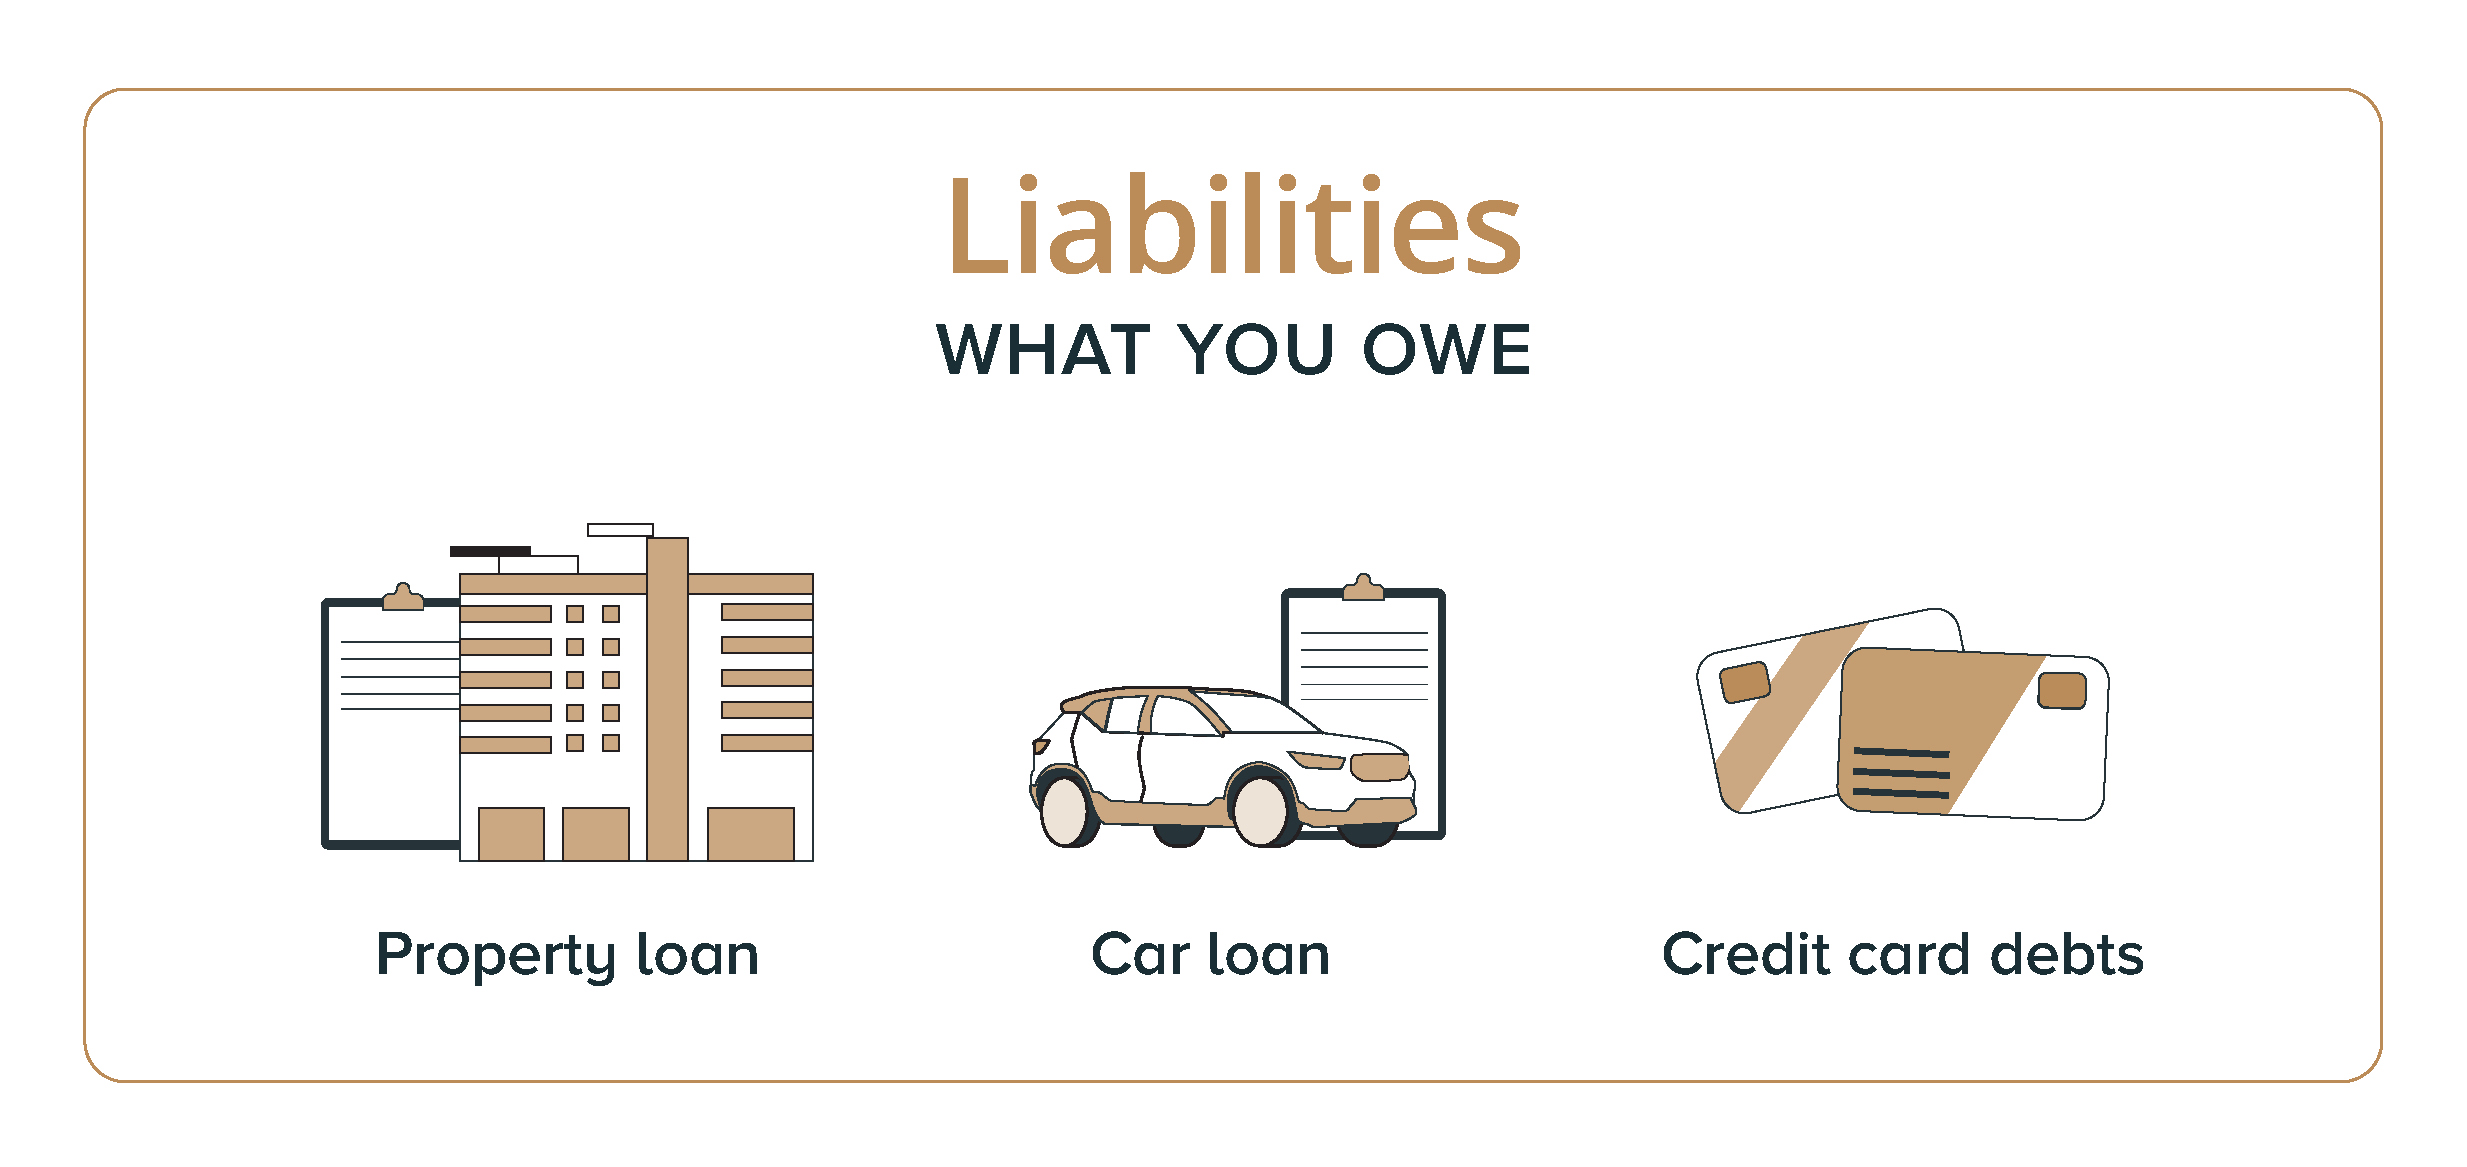 What are liabilities? Liabilities are the things you owe.